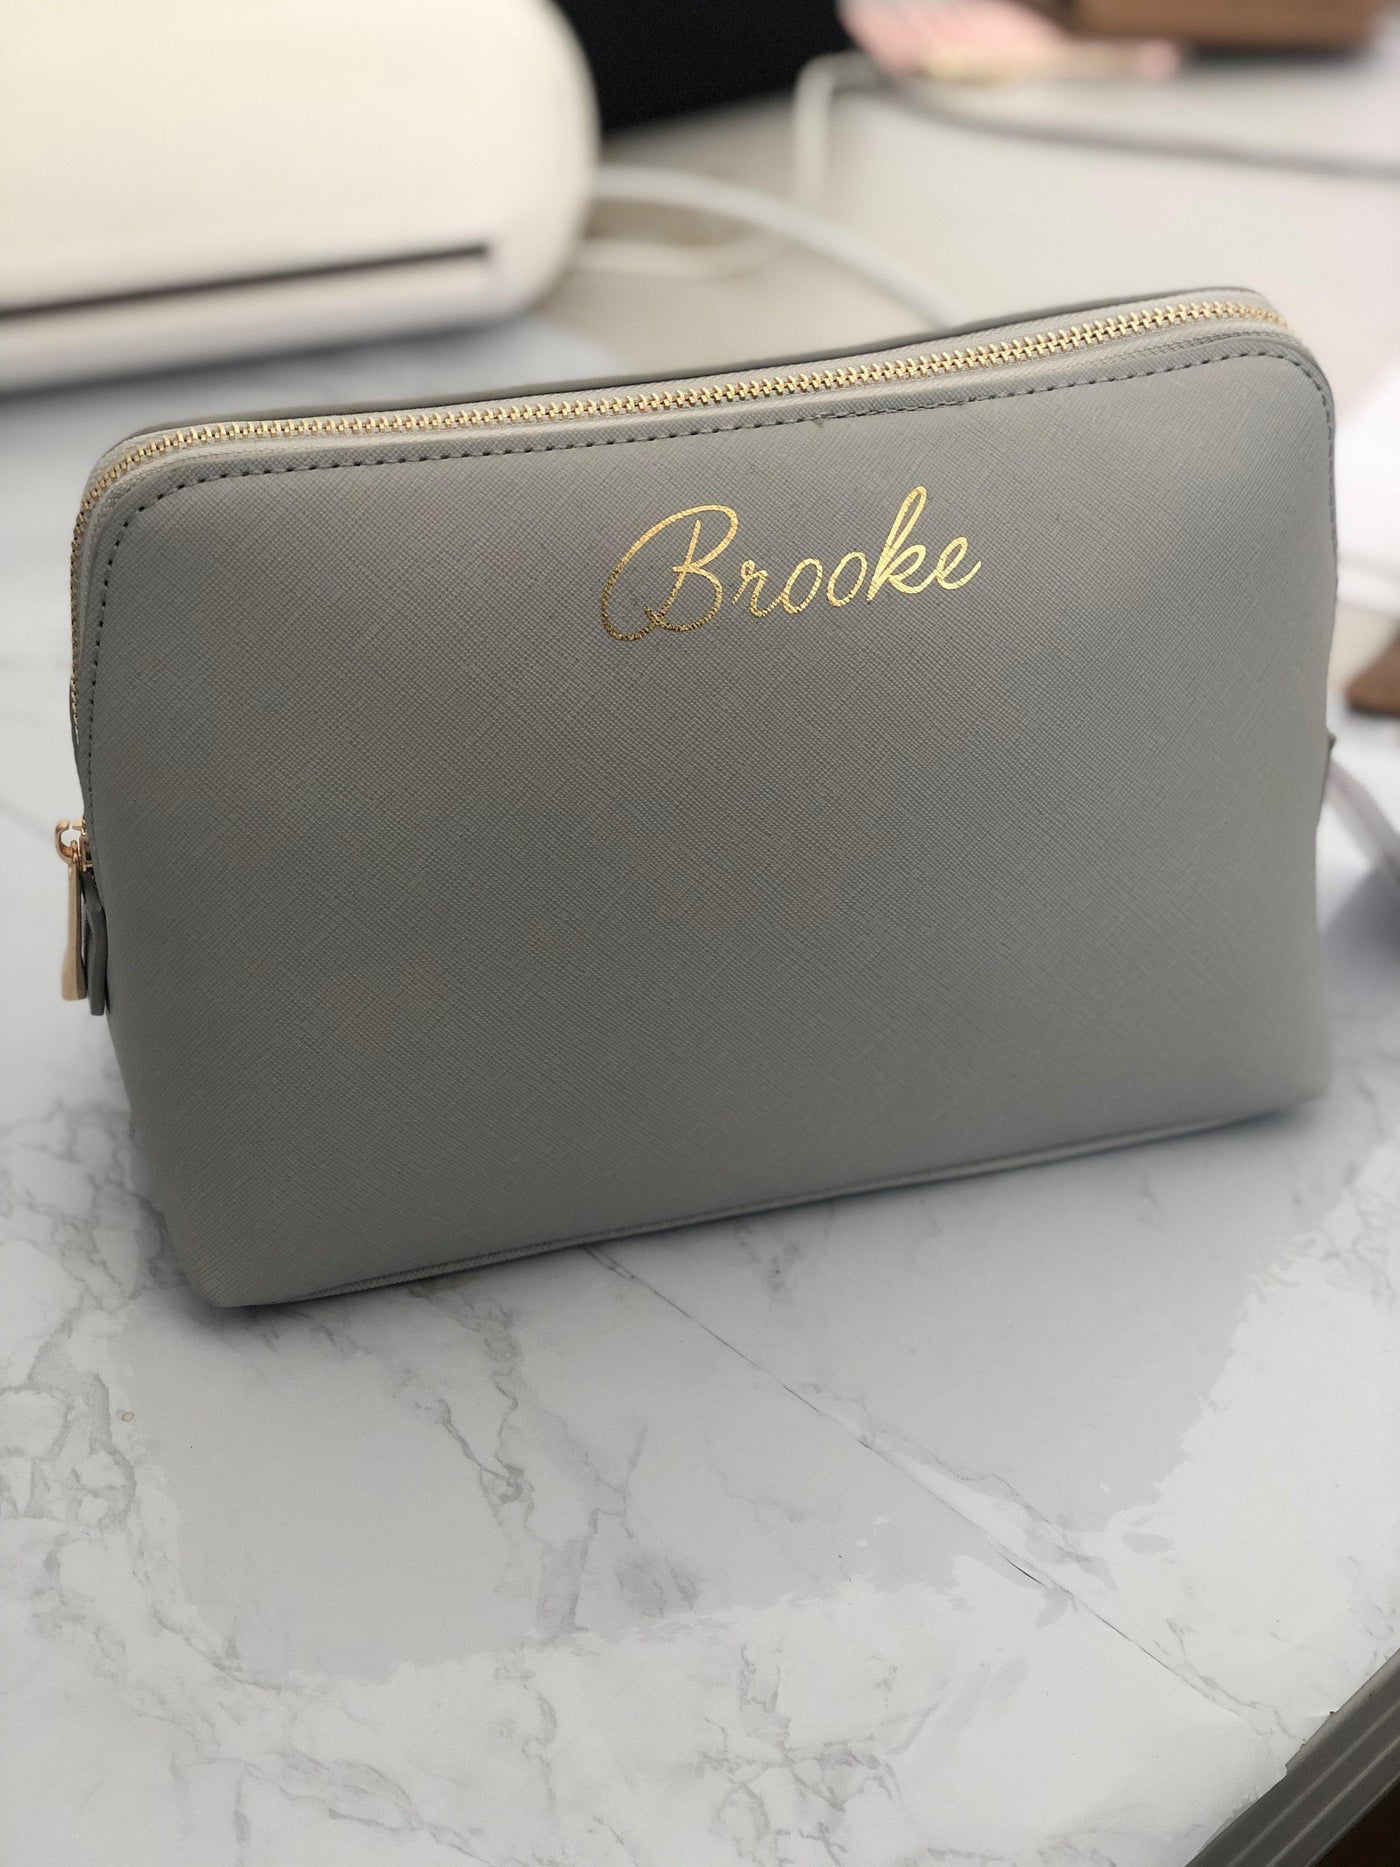 Personalised name make-up bag with gold foil